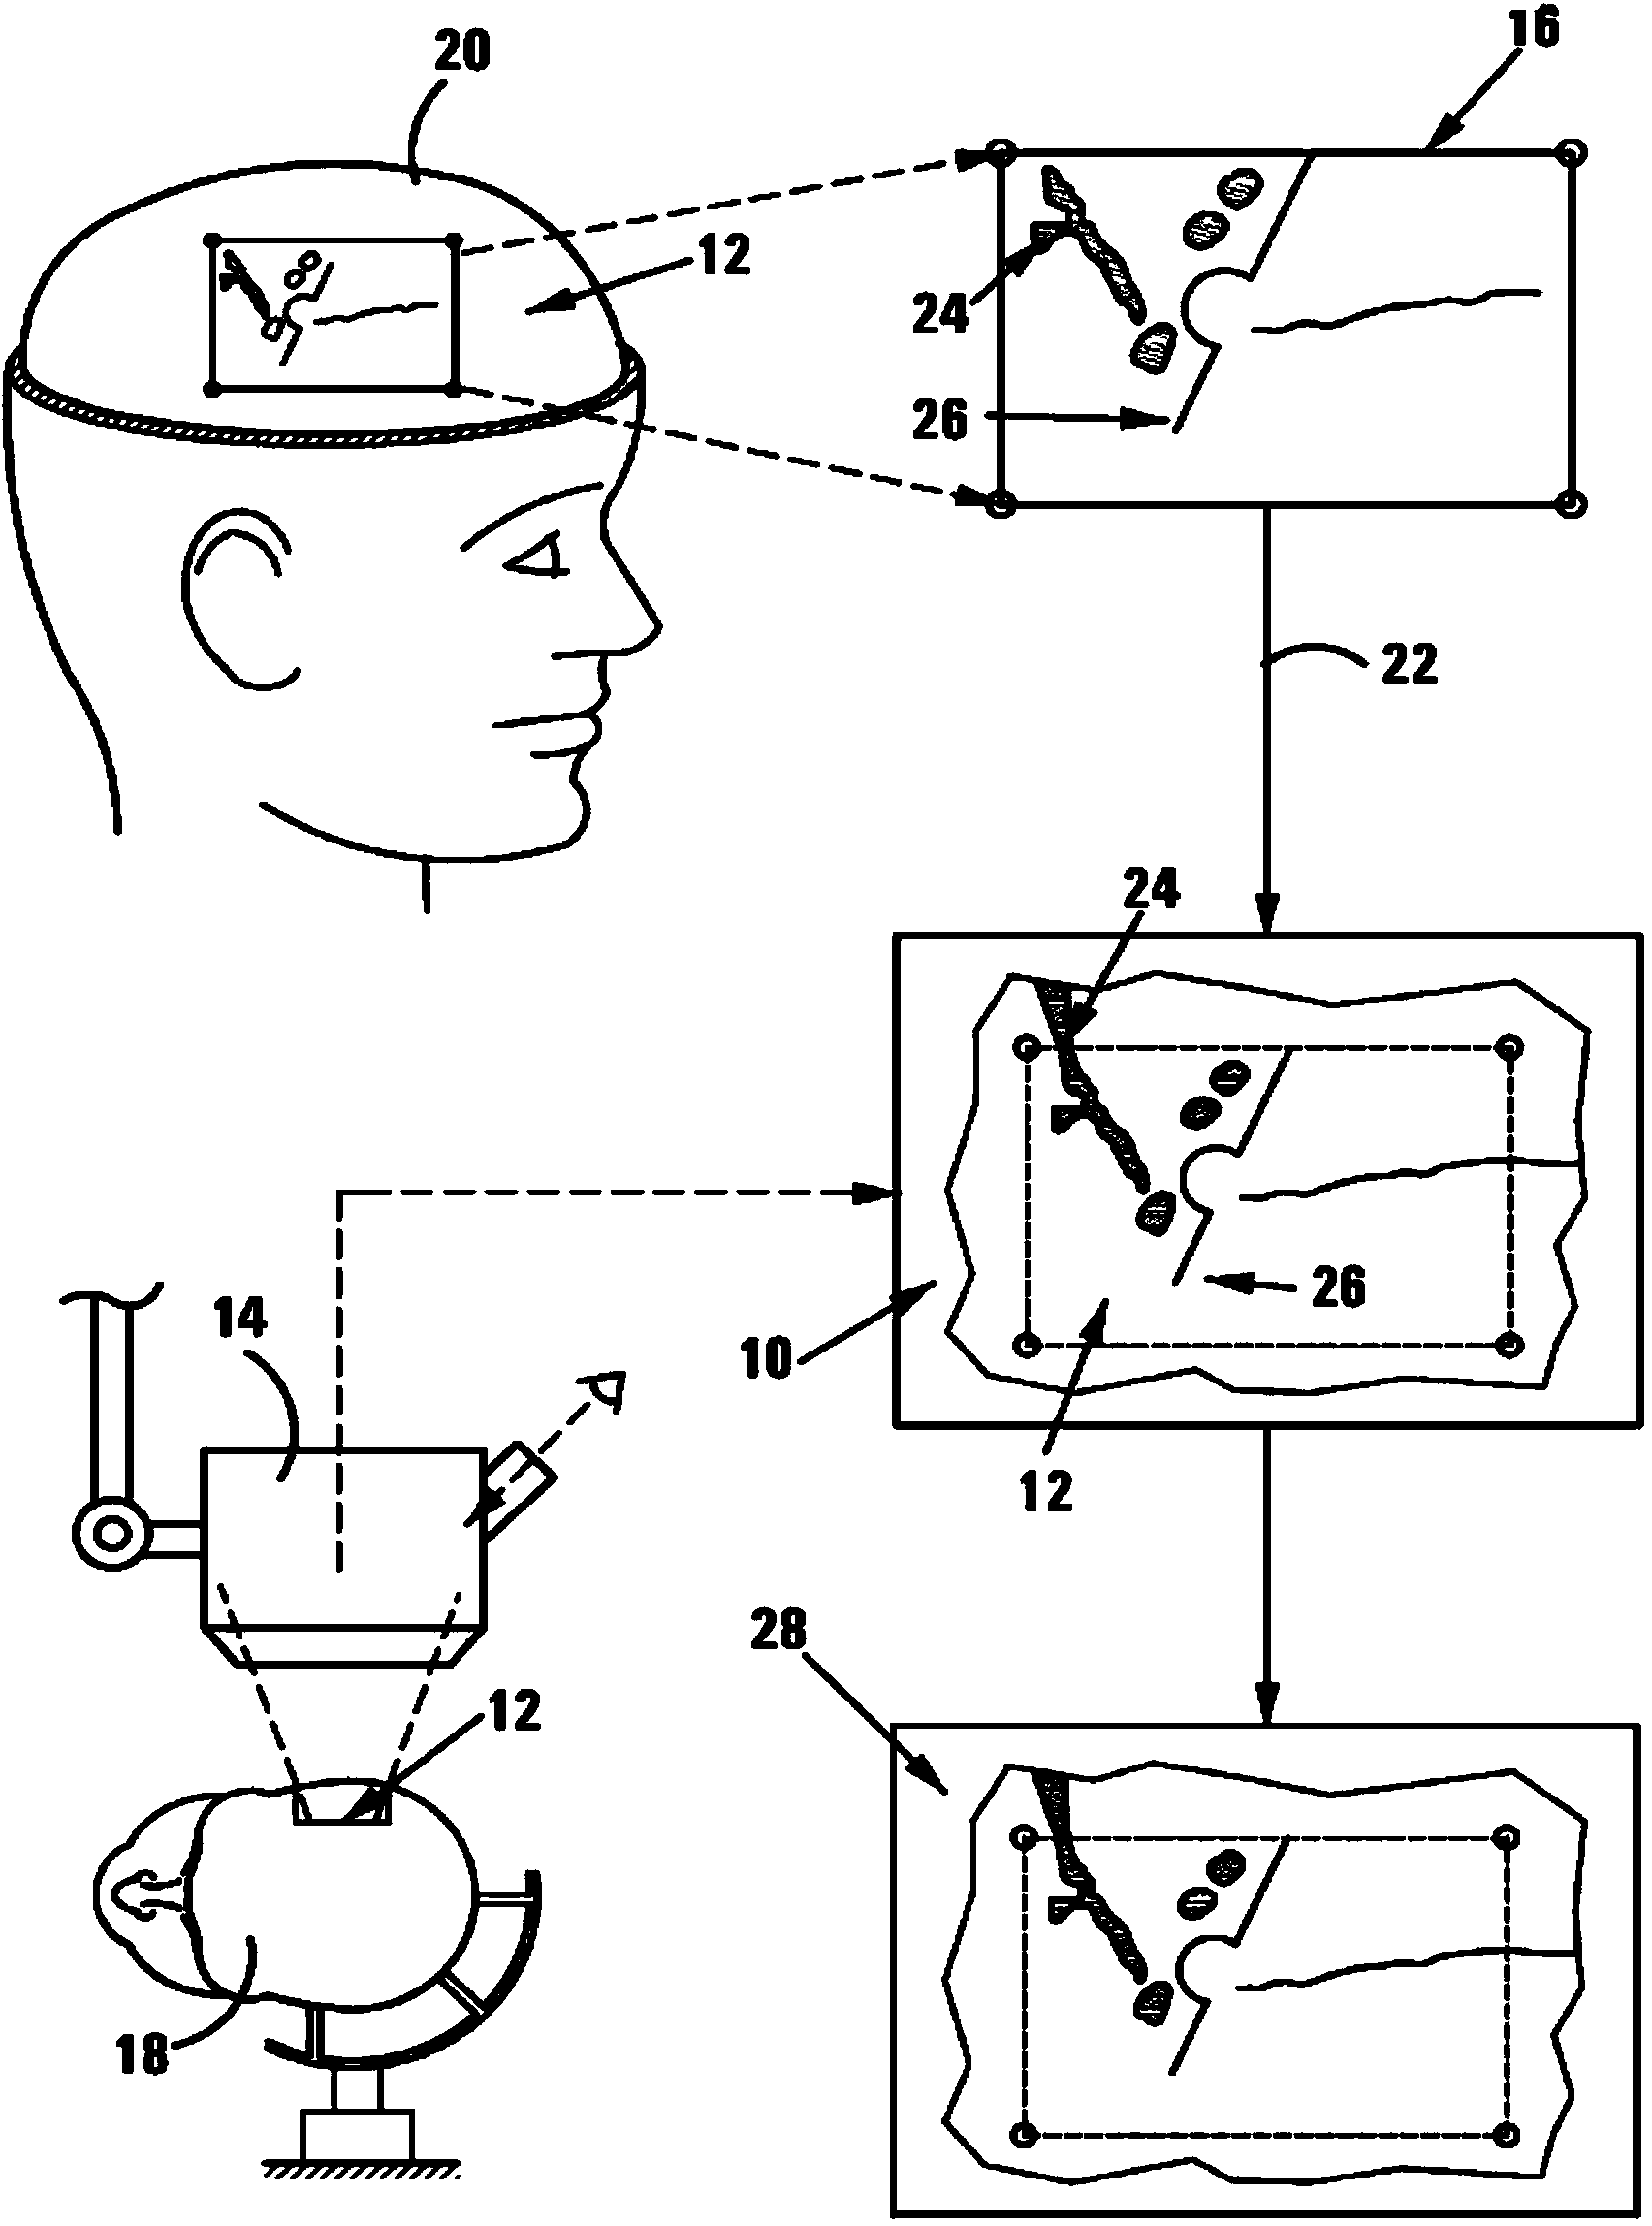 Method of and system for overlaying NBS functional data on a live image of a brain